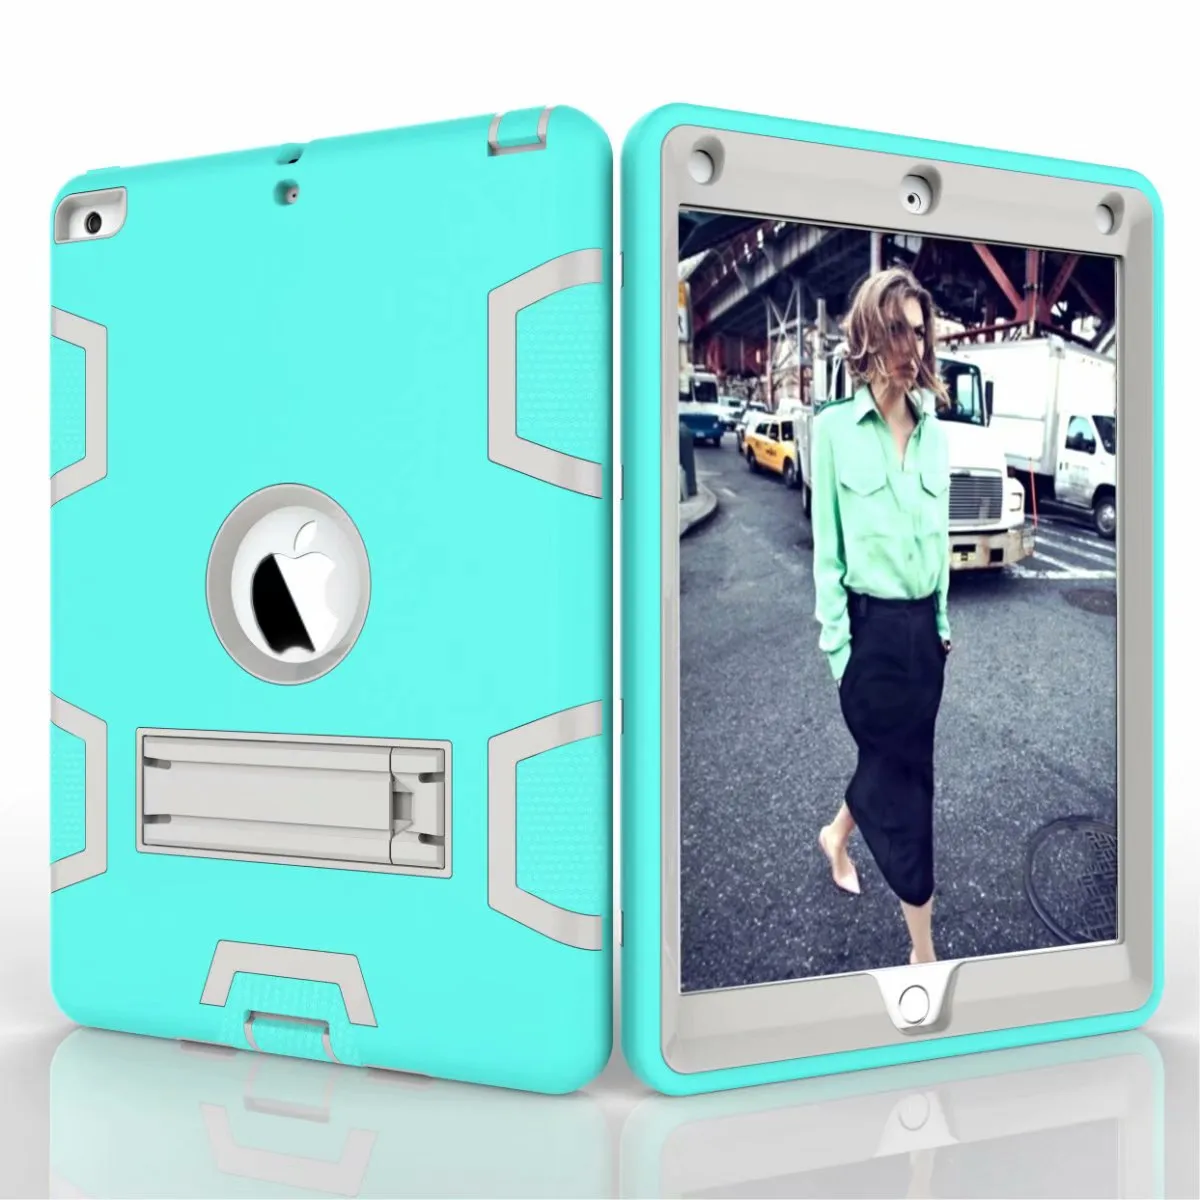 Case cover for apple ipad Air 2 tablet Stand Shockproof Heavy Duty Protect Skin Rubber Hybrid Case For iPad 6 97 tablet case3390208